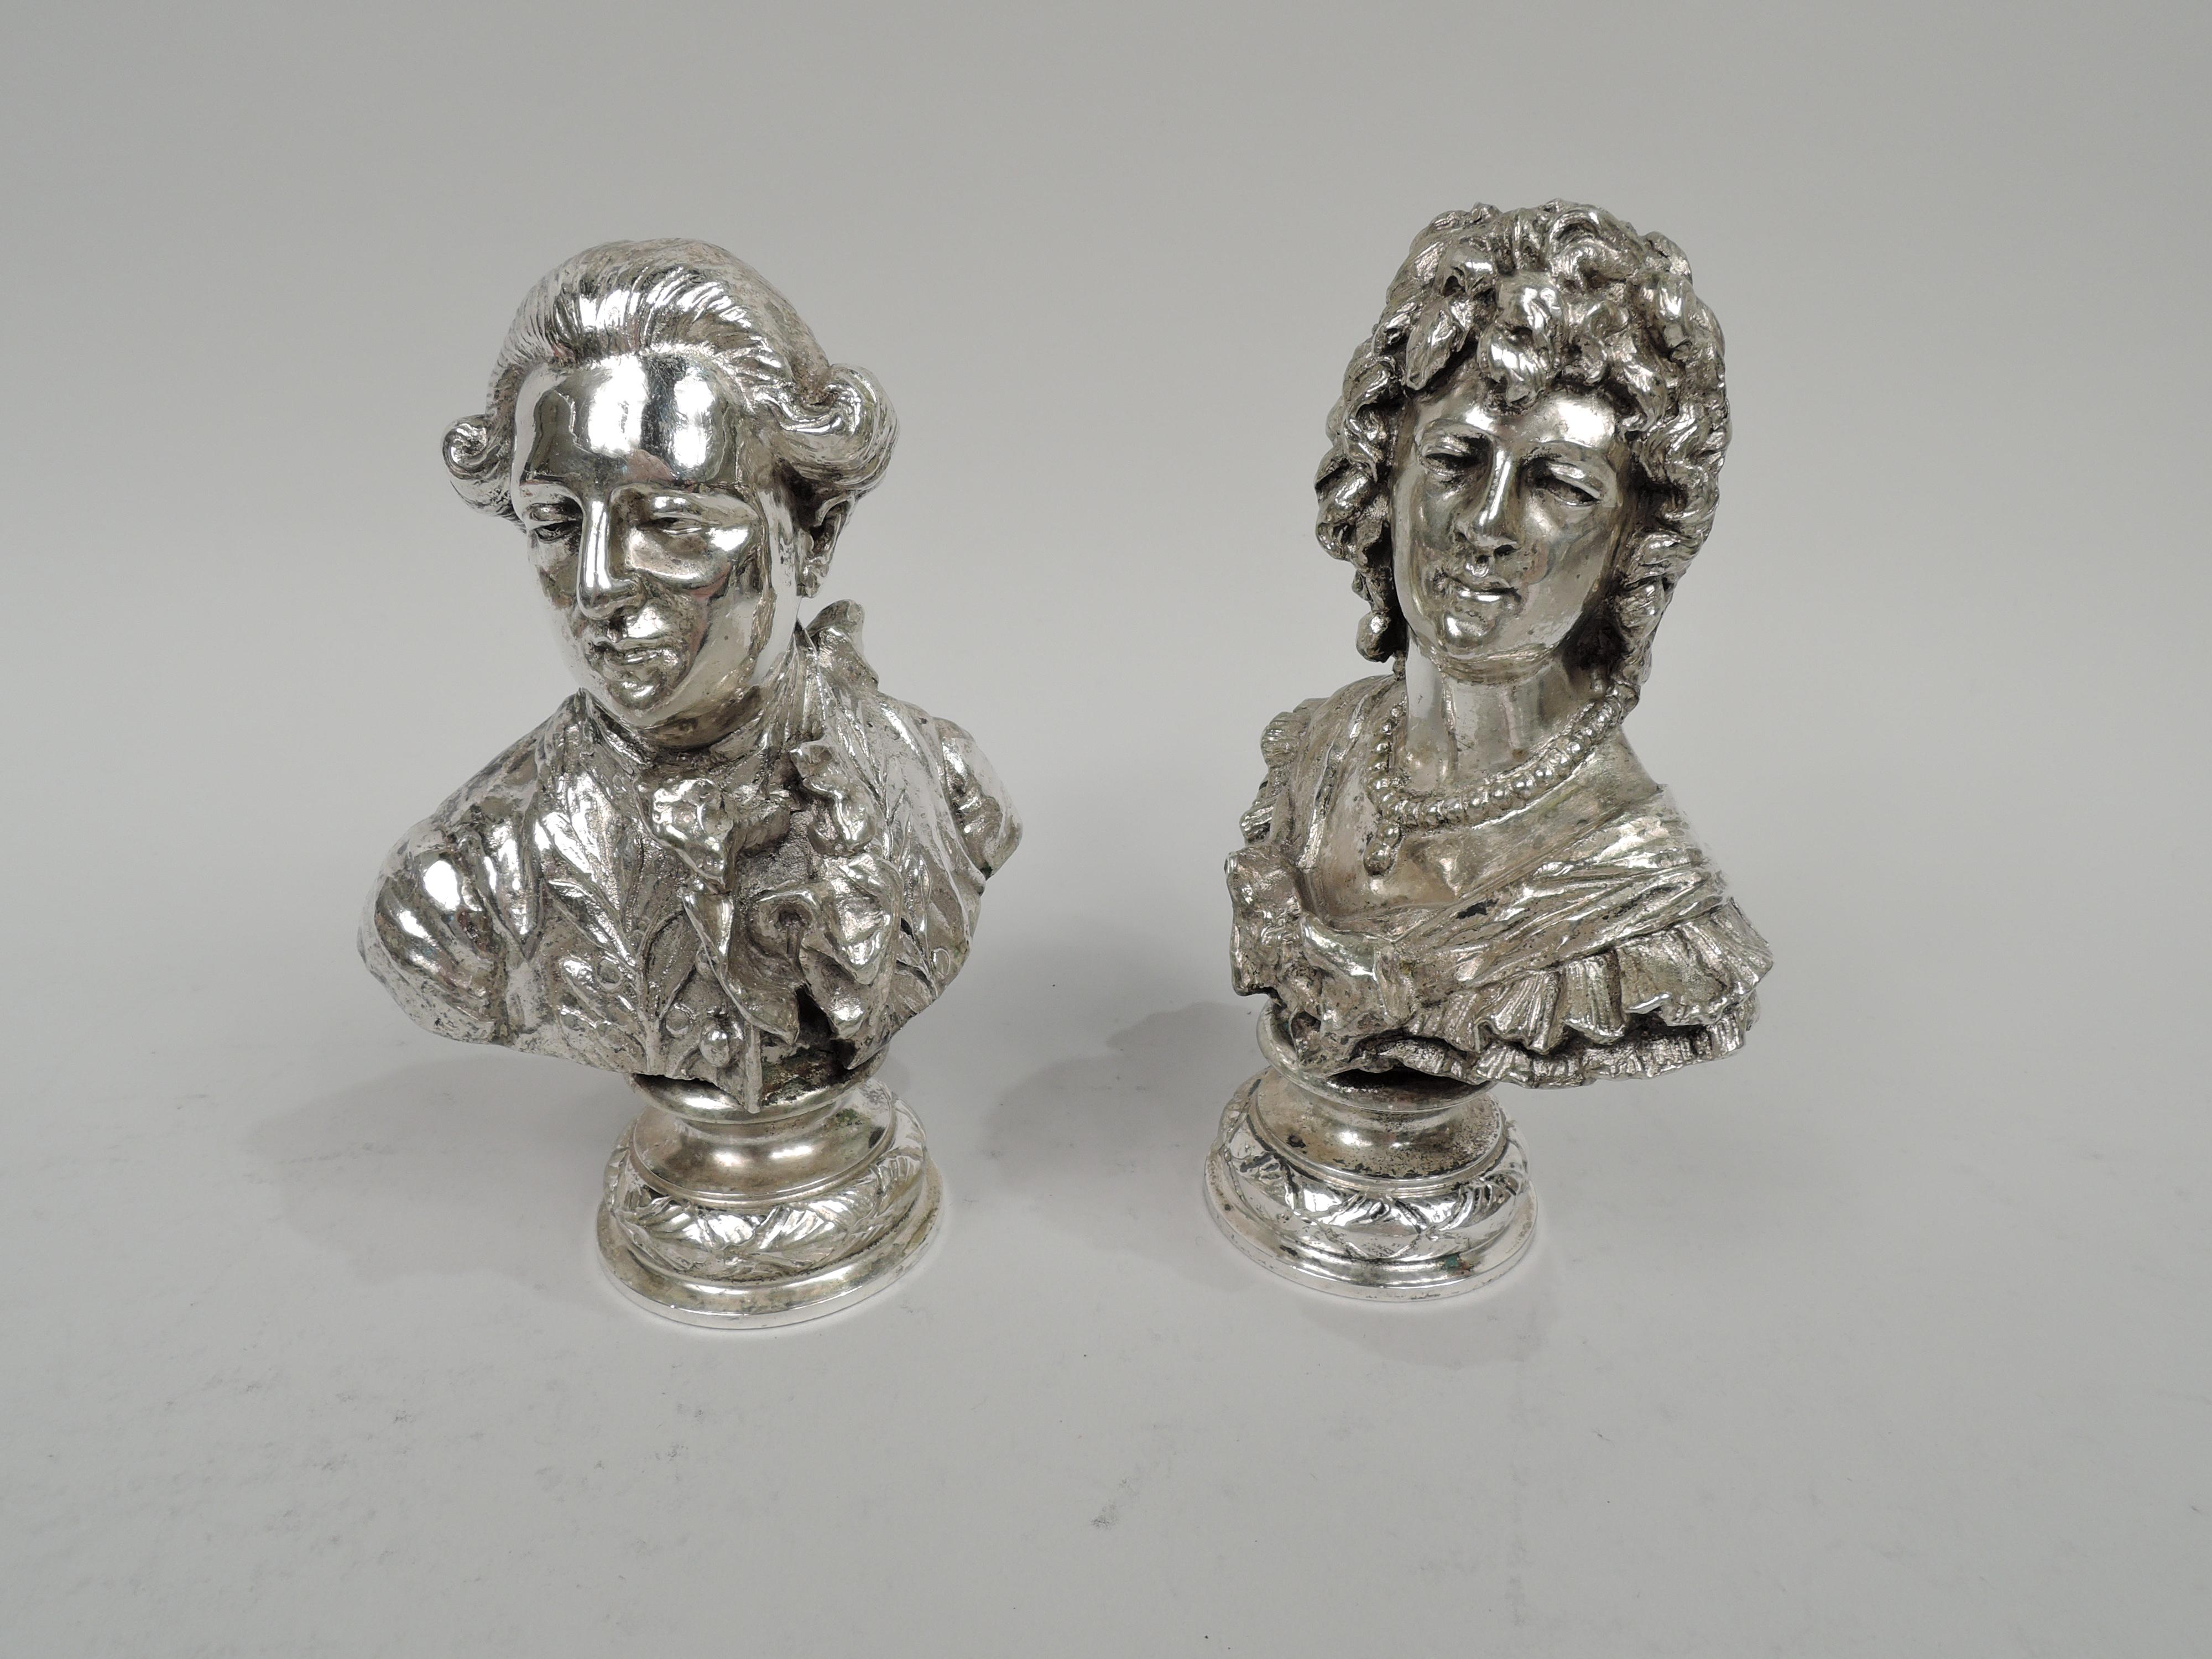 Pair of turn-of-the-century cast silver busts of ancien regime courtiers. The woman evokes a Baroque beauty from the reign of Louis XIV with an imperious face softened with ringlets, a necklace of walnut-sized pearls around a bare throat, and a